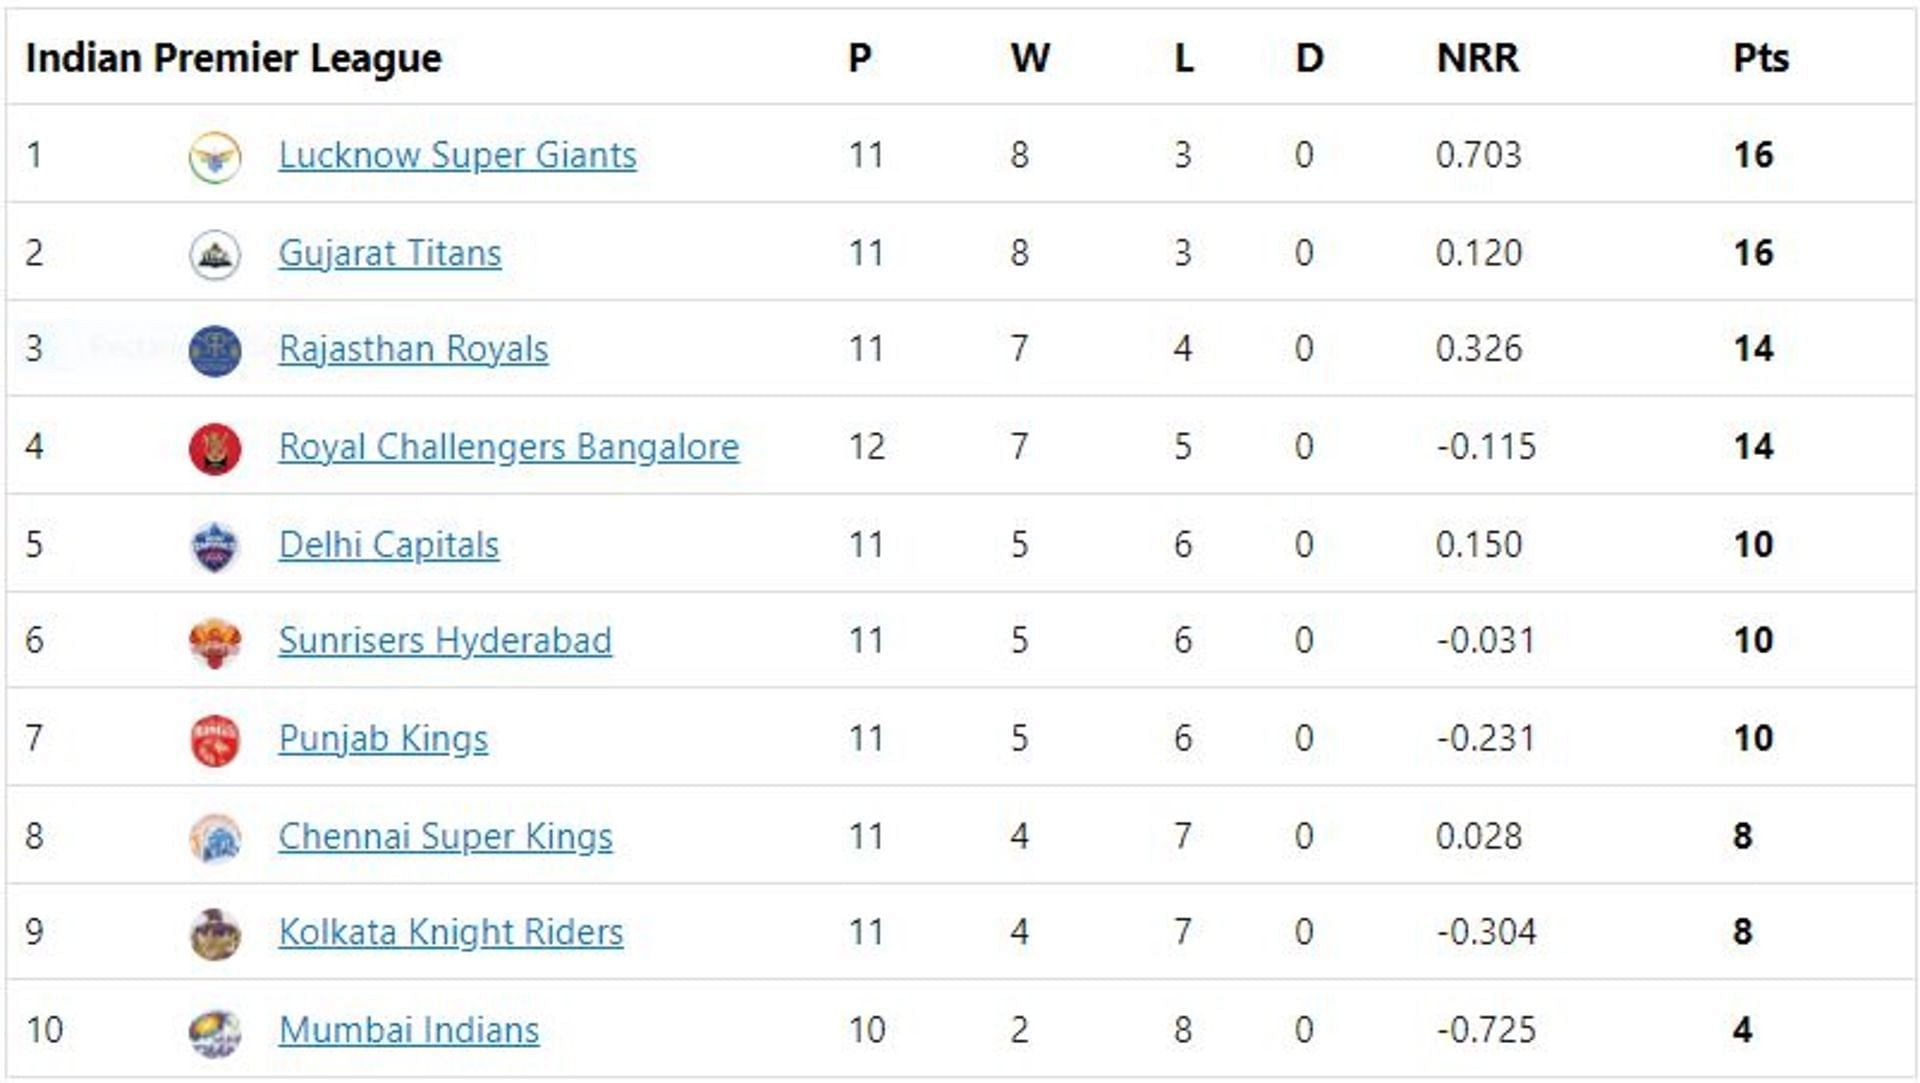 CSK climb over KKR in the points table